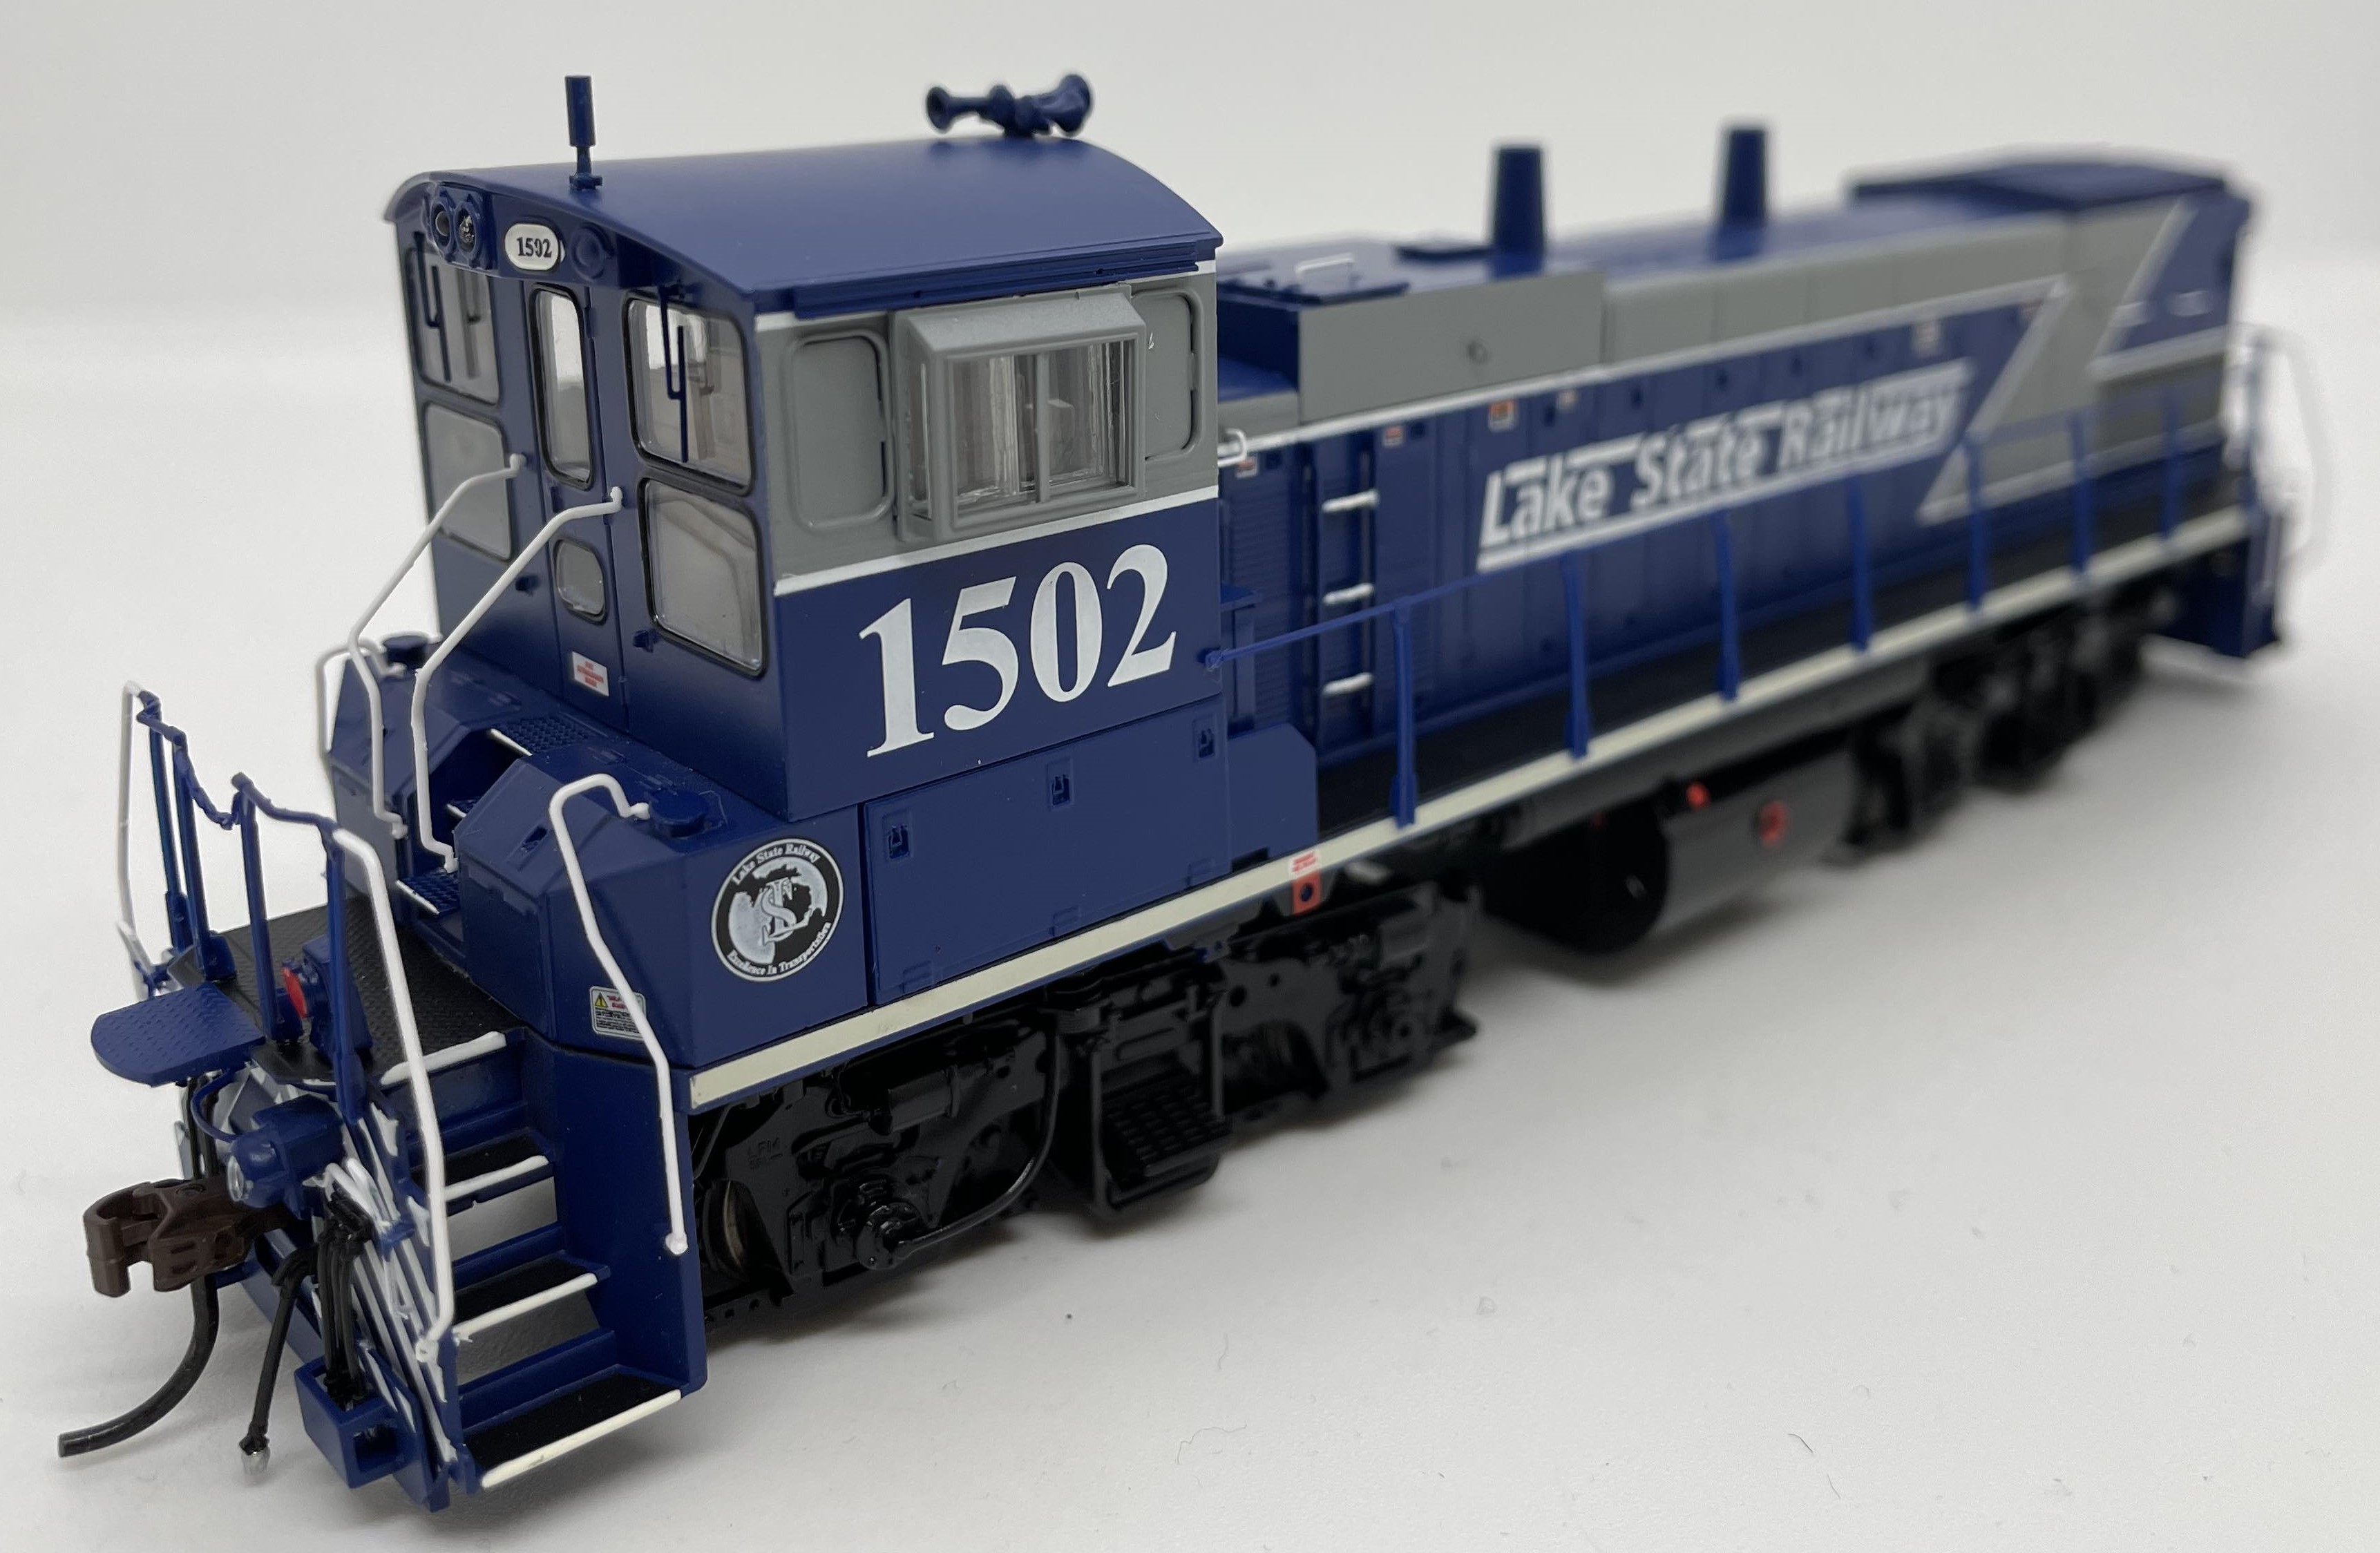 Review Tamiya Panel Line Accents on N Scale Model Trains